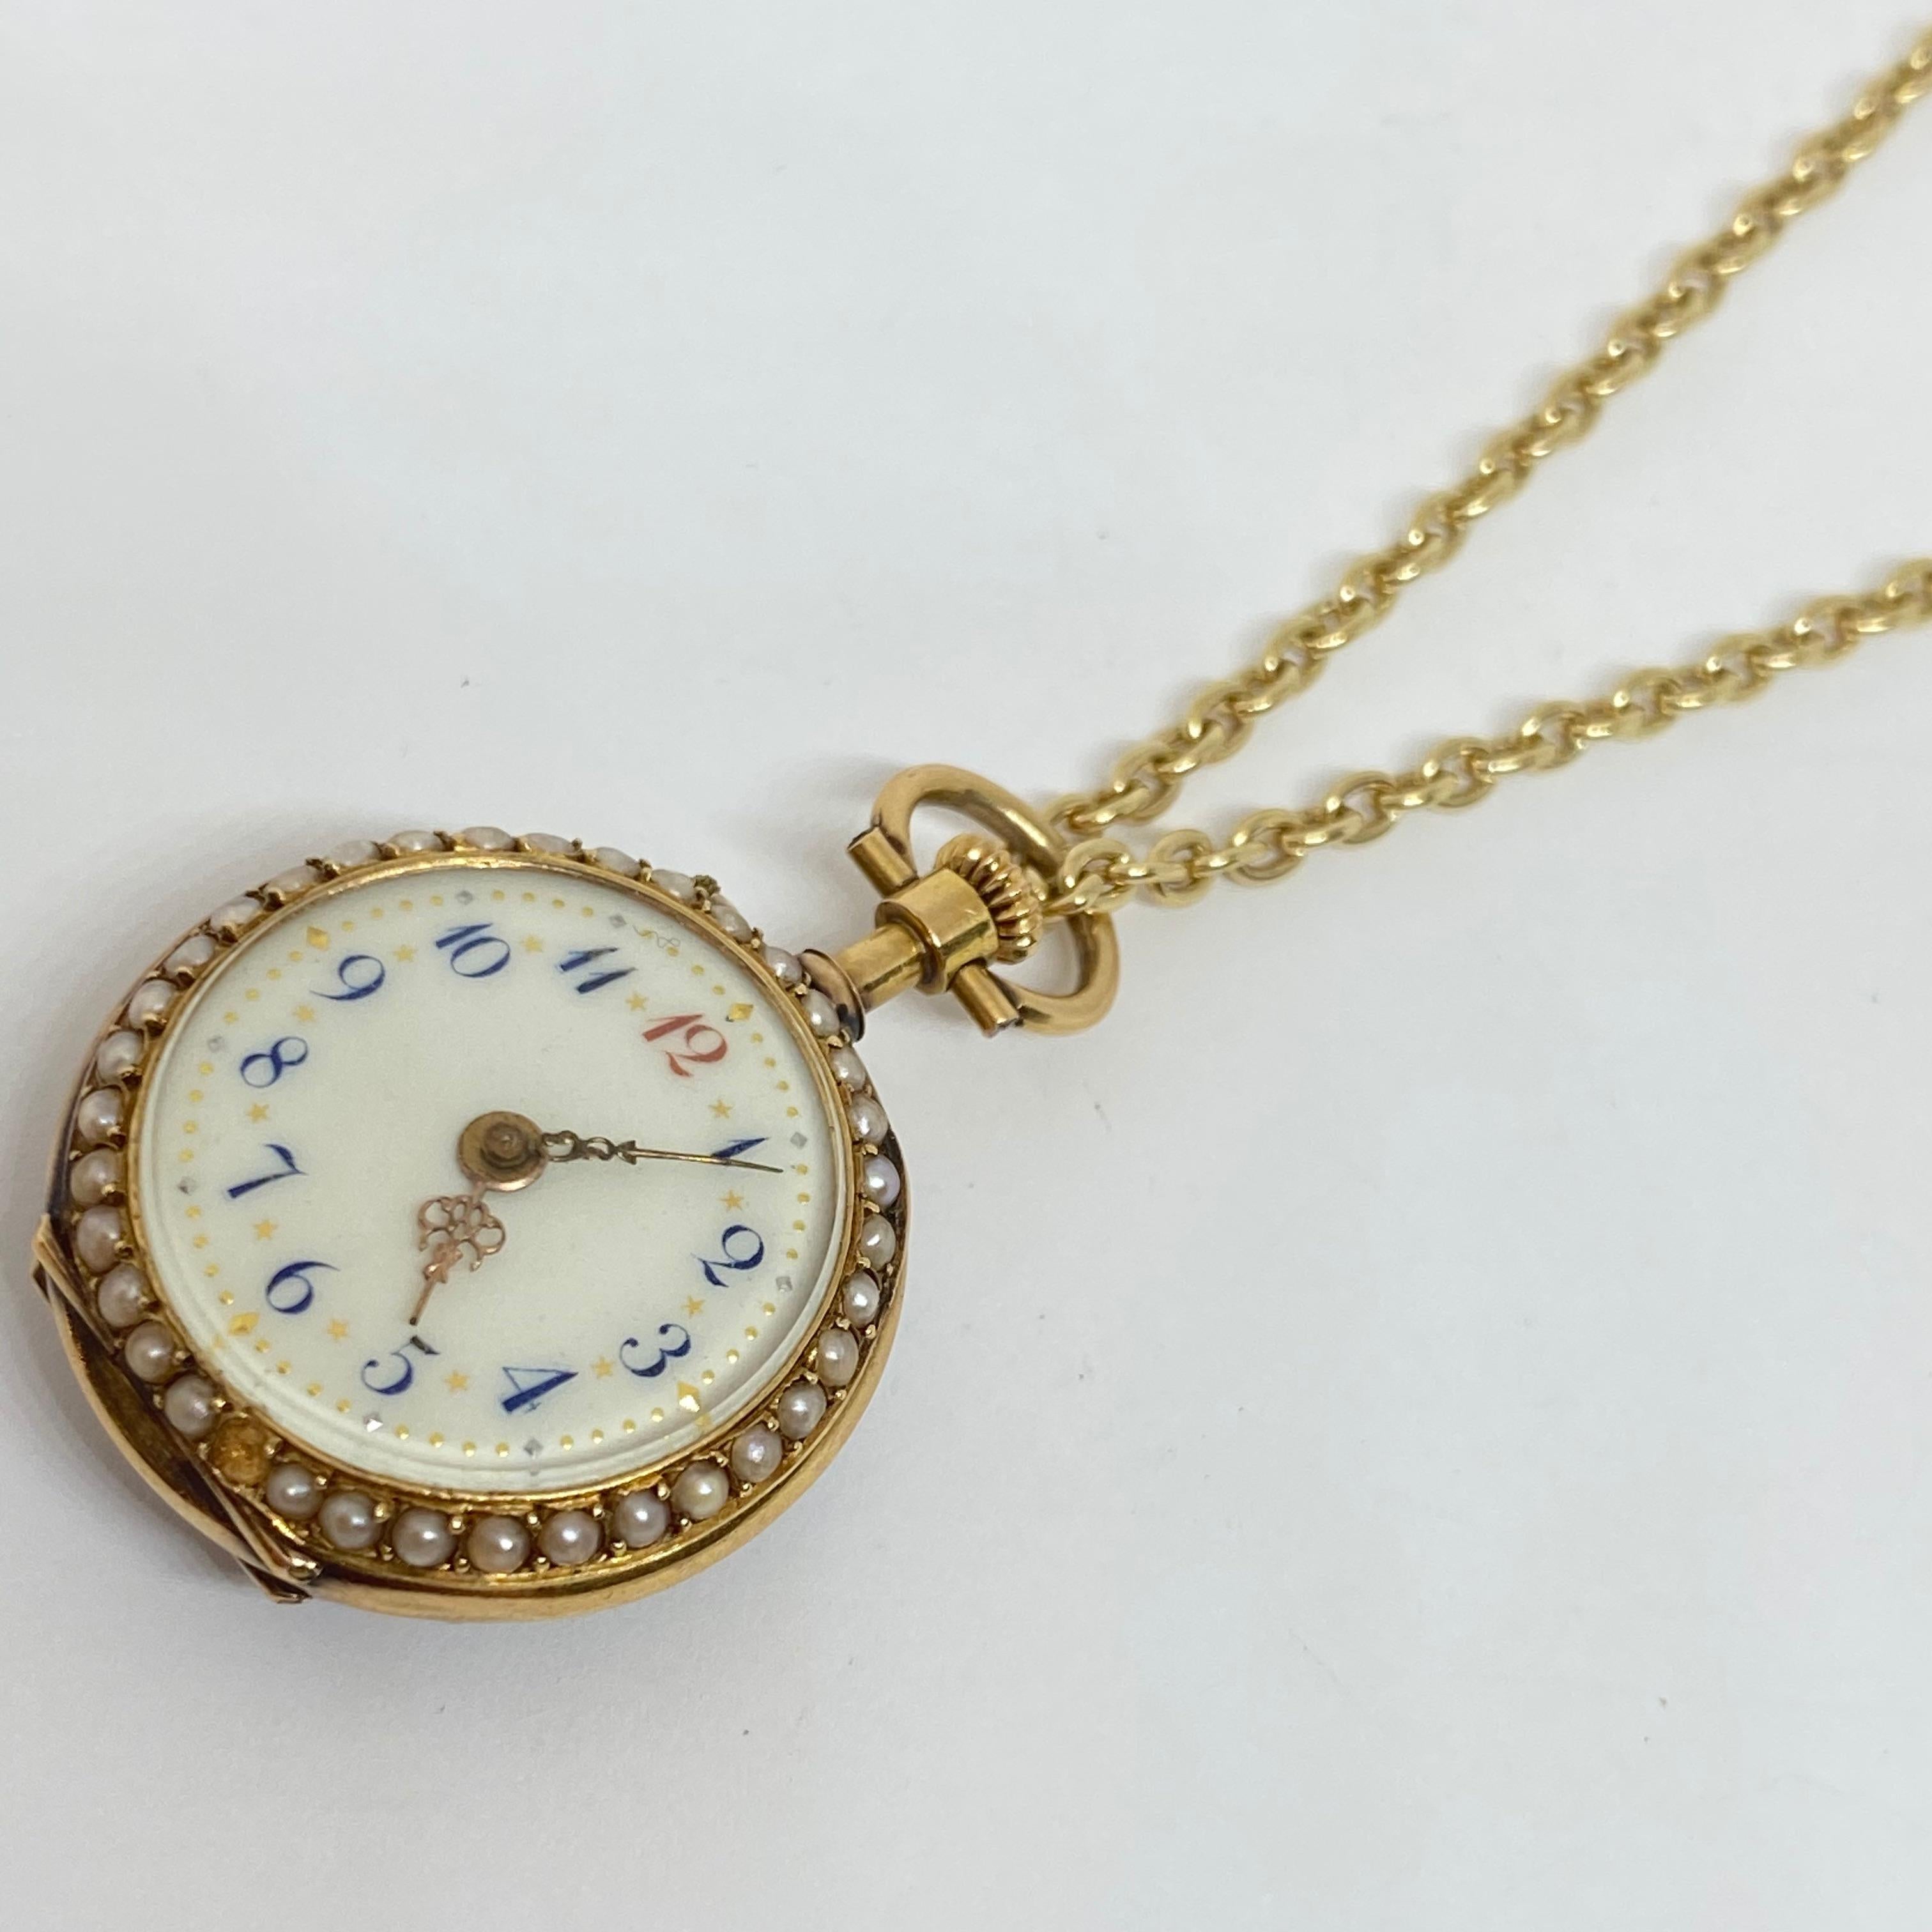 Enamel Portrait Pocket Watch measures 25mm in 18K yellow gold. Beautiful tiny Jaeger LeCoultre lady's pocket or necklace watch with enamel portrait of lady on back surrounded by natural seed pearl border, dial is porcelain with blue Arabic numerals,